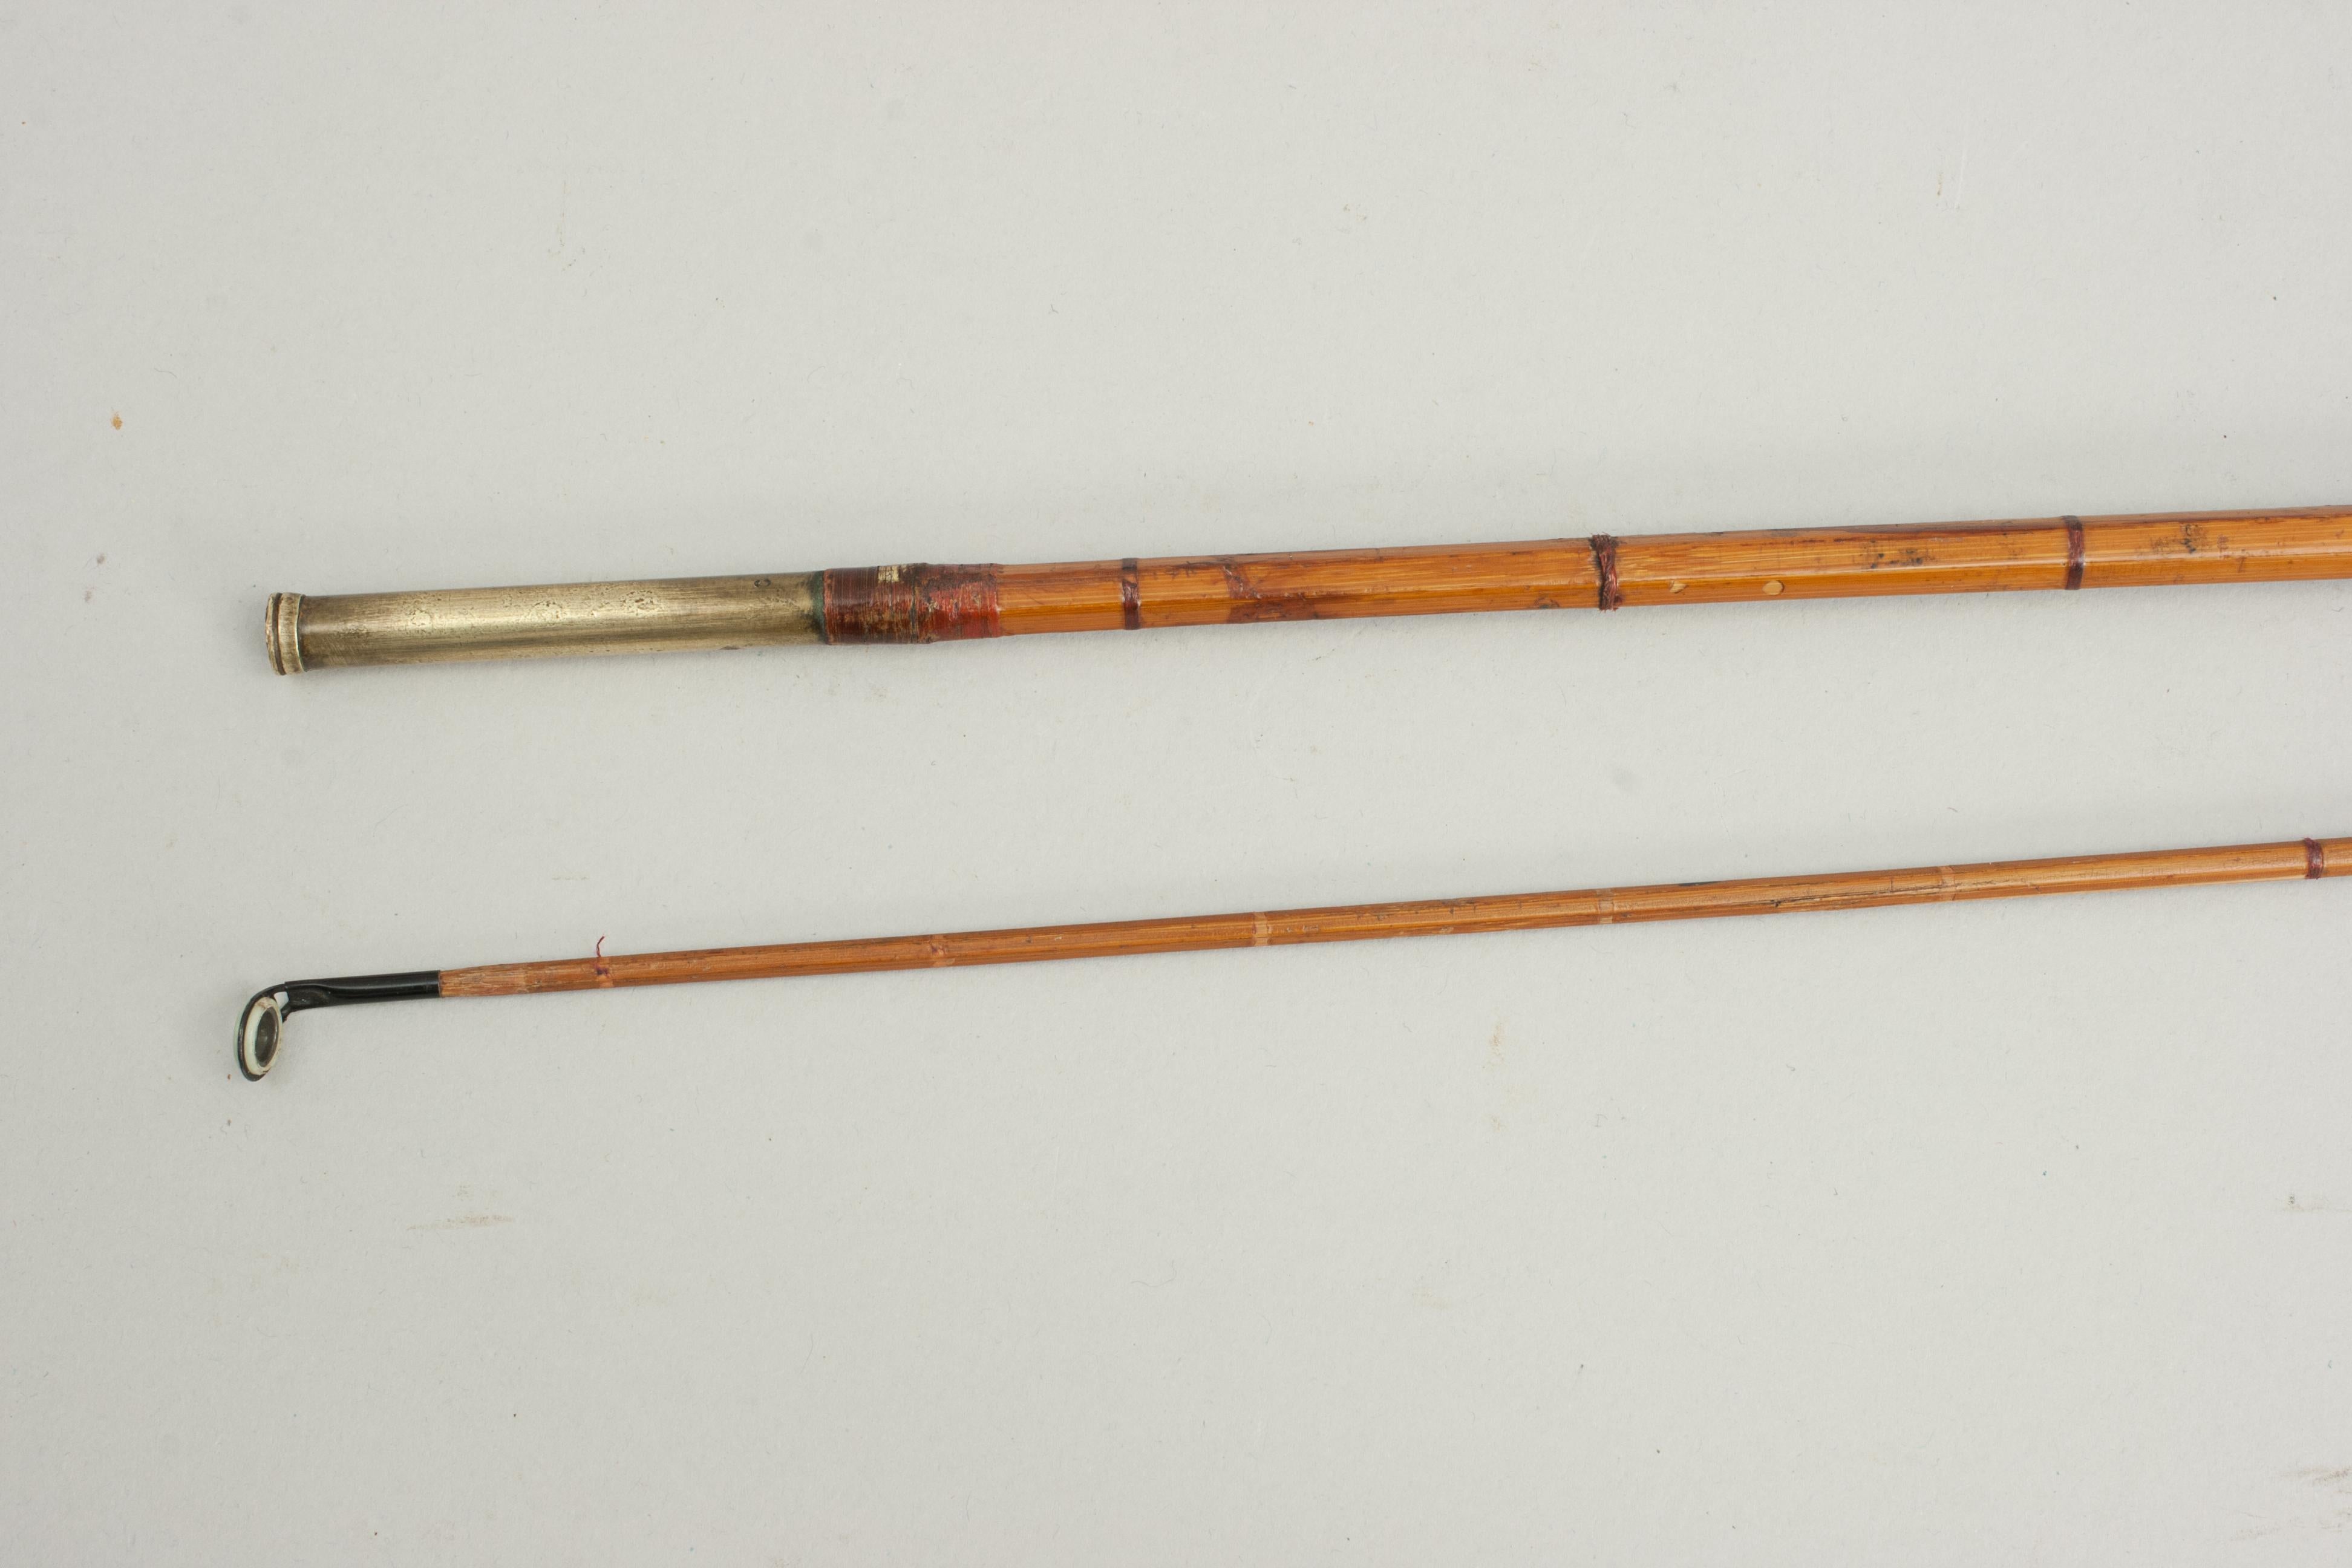 Bamboo Vintage Allcock Fly Fishing Rod For Sale